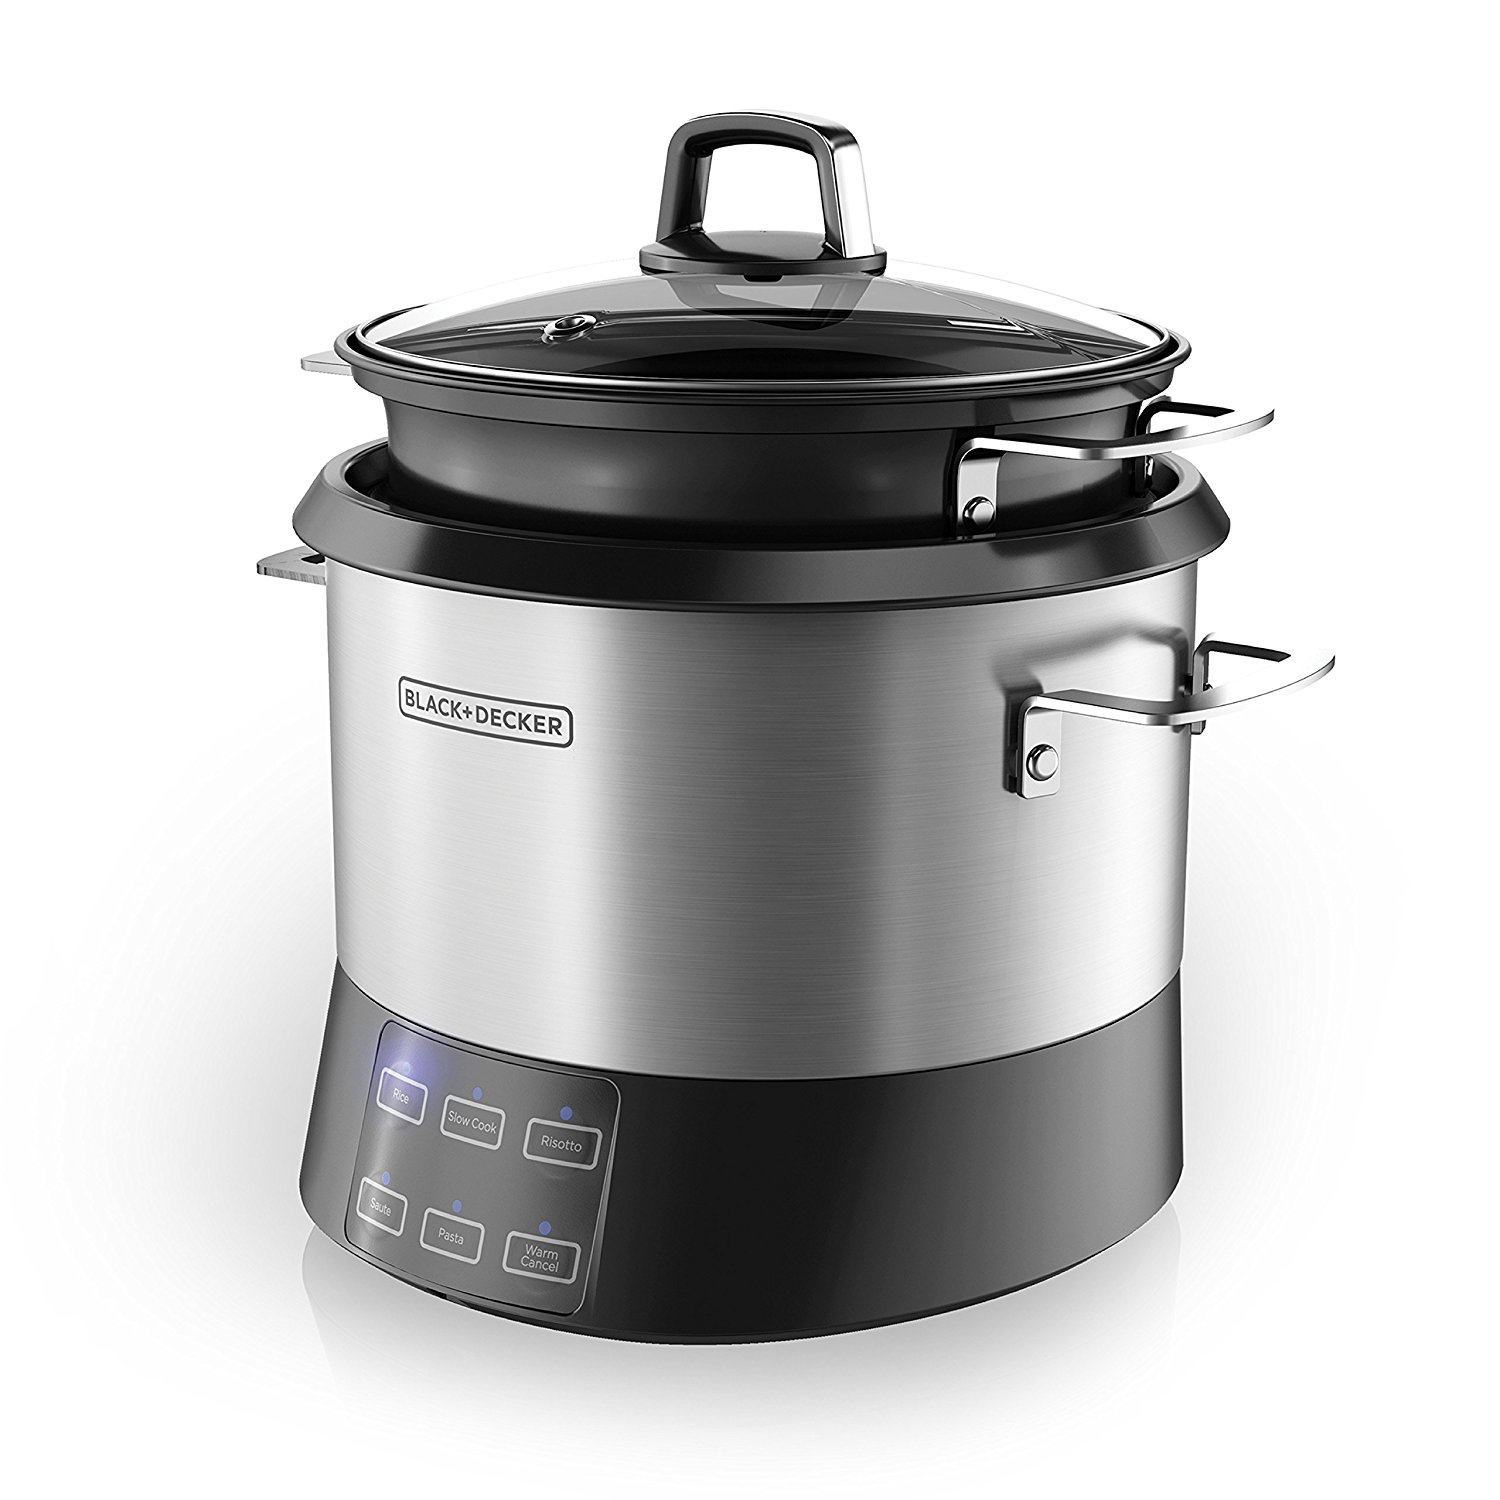 6 Extra Large Rice Cookers with Reviews and Home Use)